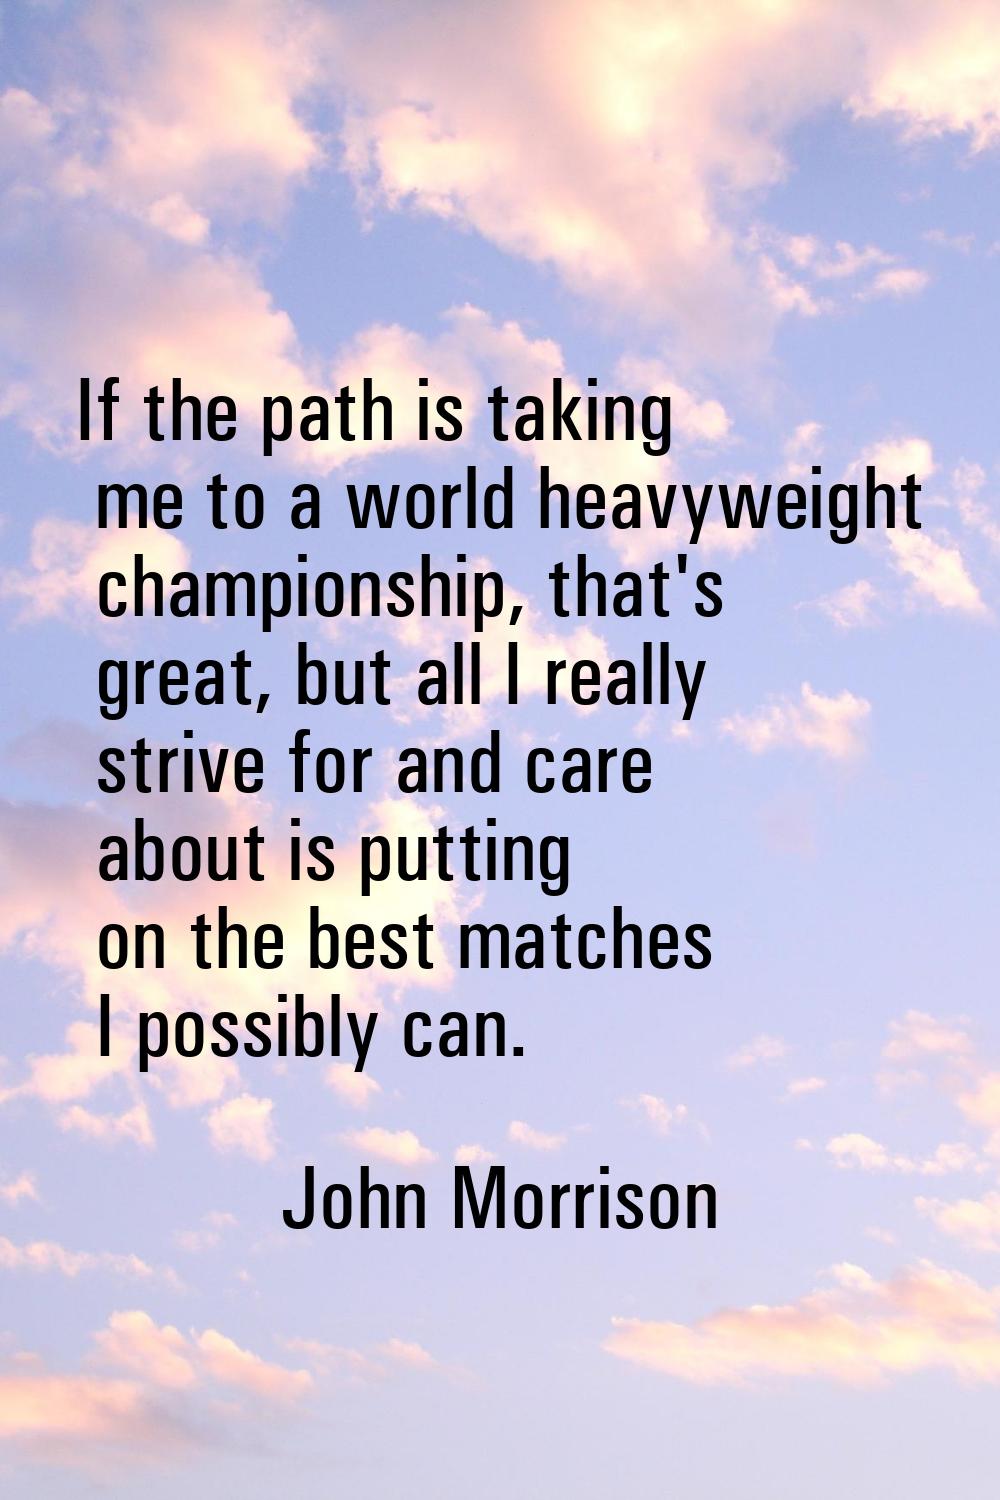 If the path is taking me to a world heavyweight championship, that's great, but all I really strive